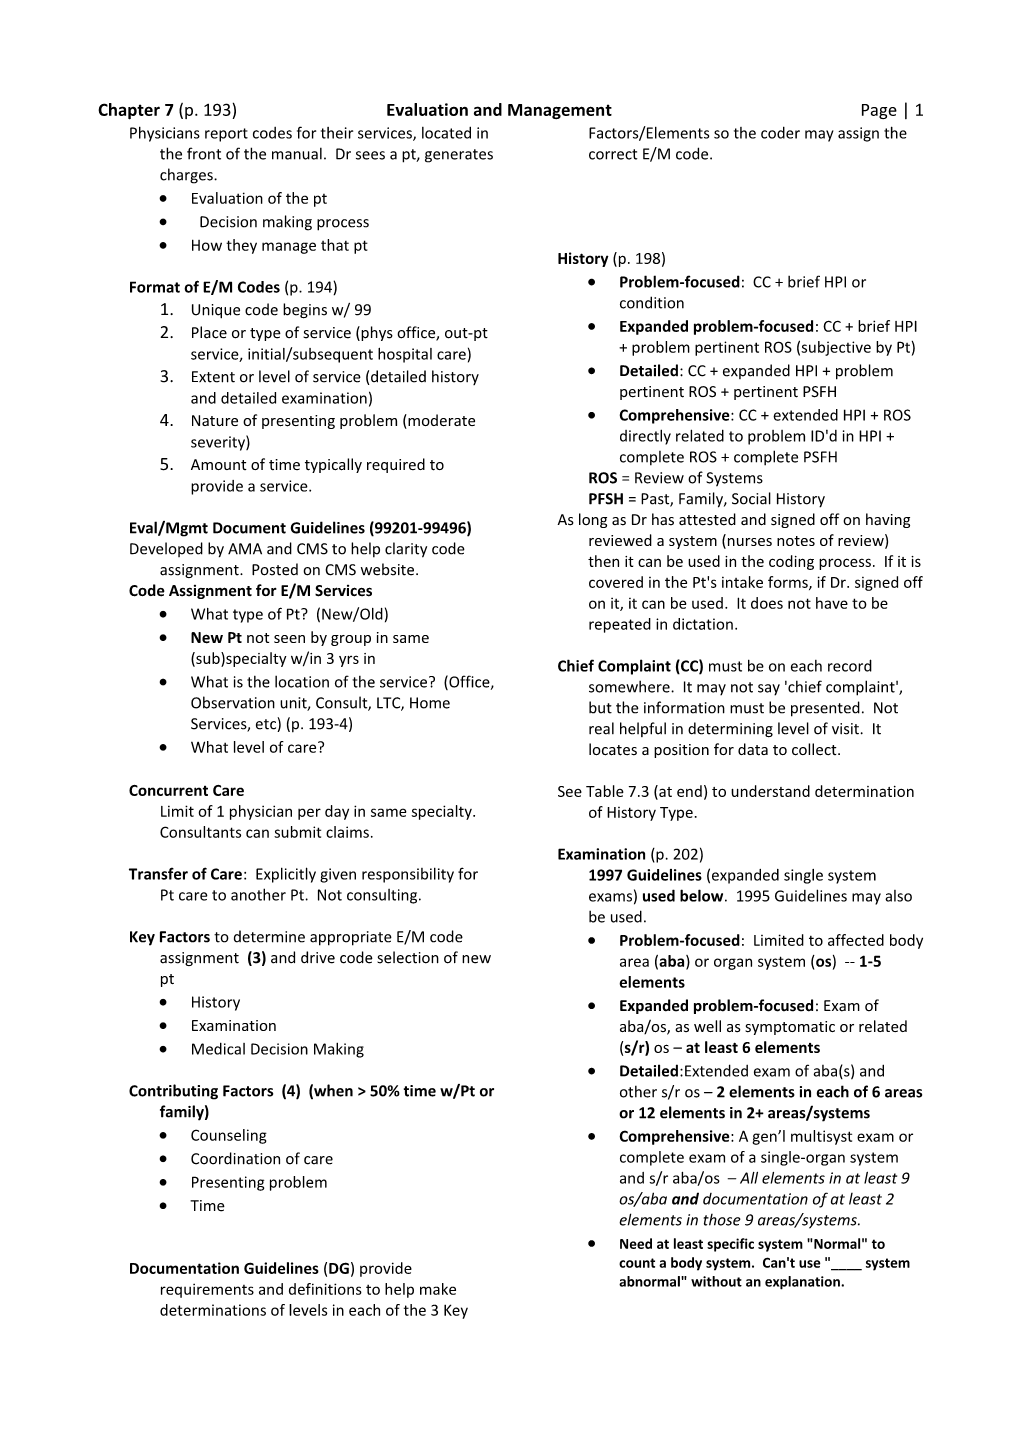 Chapter 7 (P. 193) Evaluation and Management Page 2